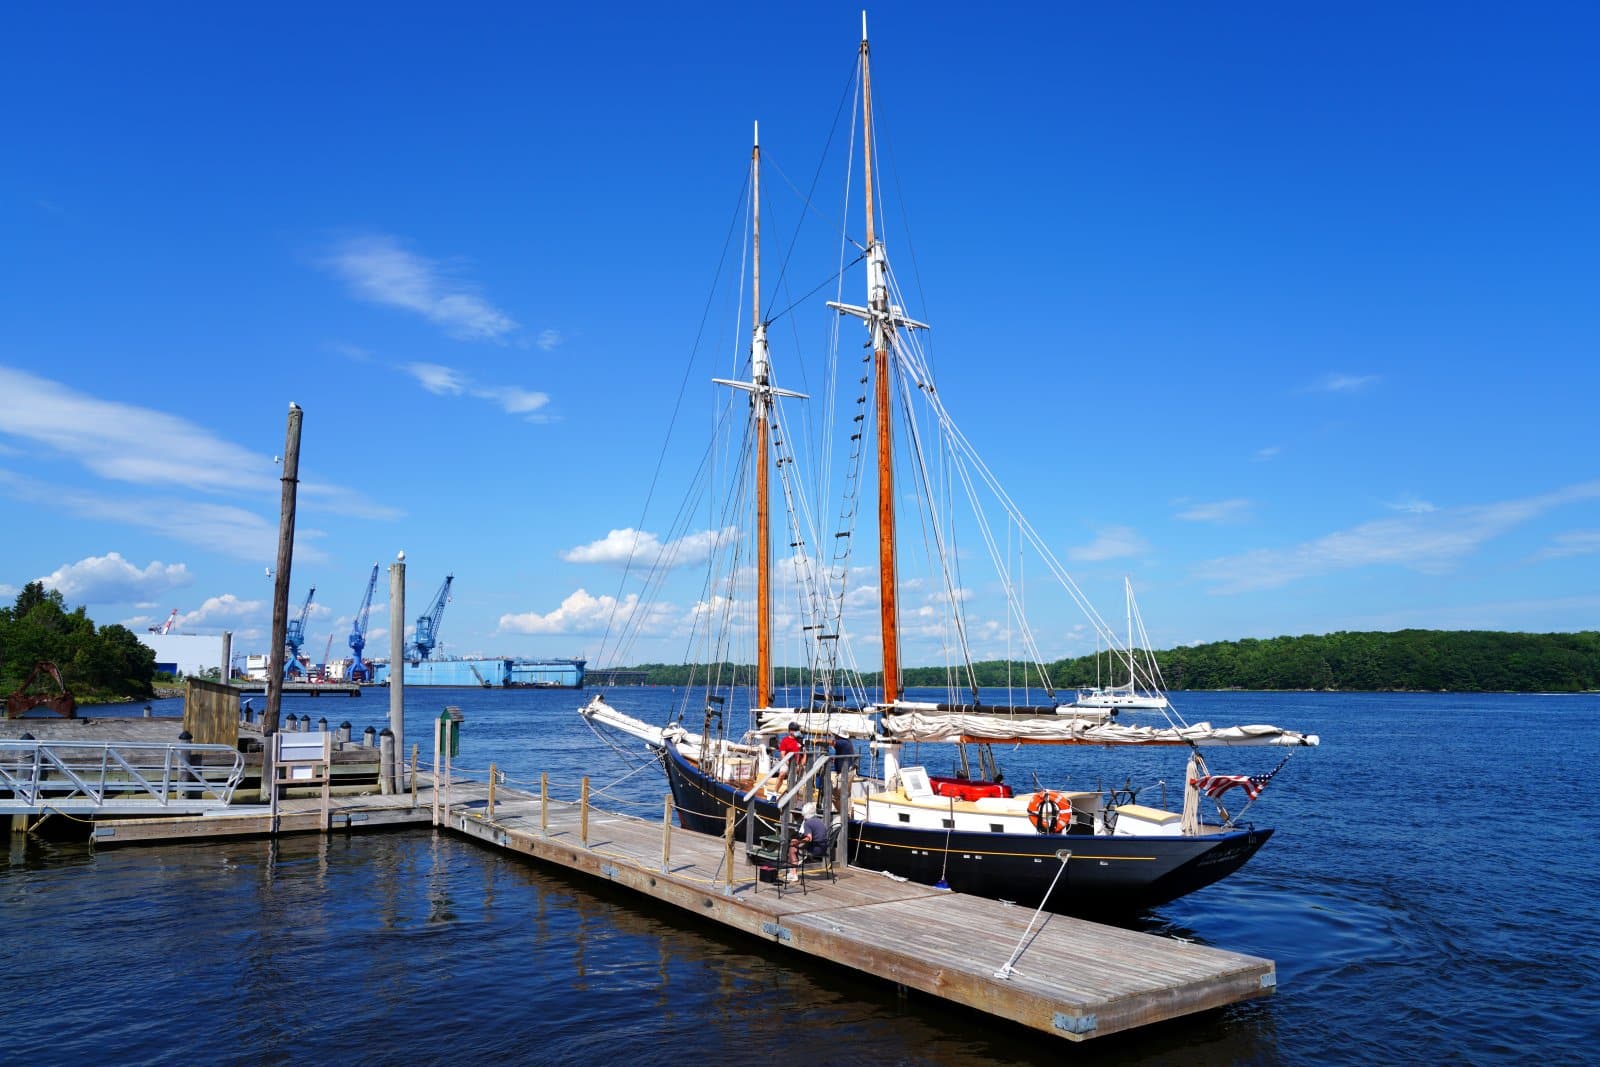 <p class="wp-caption-text">Image Credit: Shutterstock / EQRoy</p>  <p>Dive into Maine’s nautical history at the Maine Maritime Museum in Bath. It’s an enlightening experience with a modest admission fee, showcasing the state’s shipbuilding heritage and seafaring tales.</p>